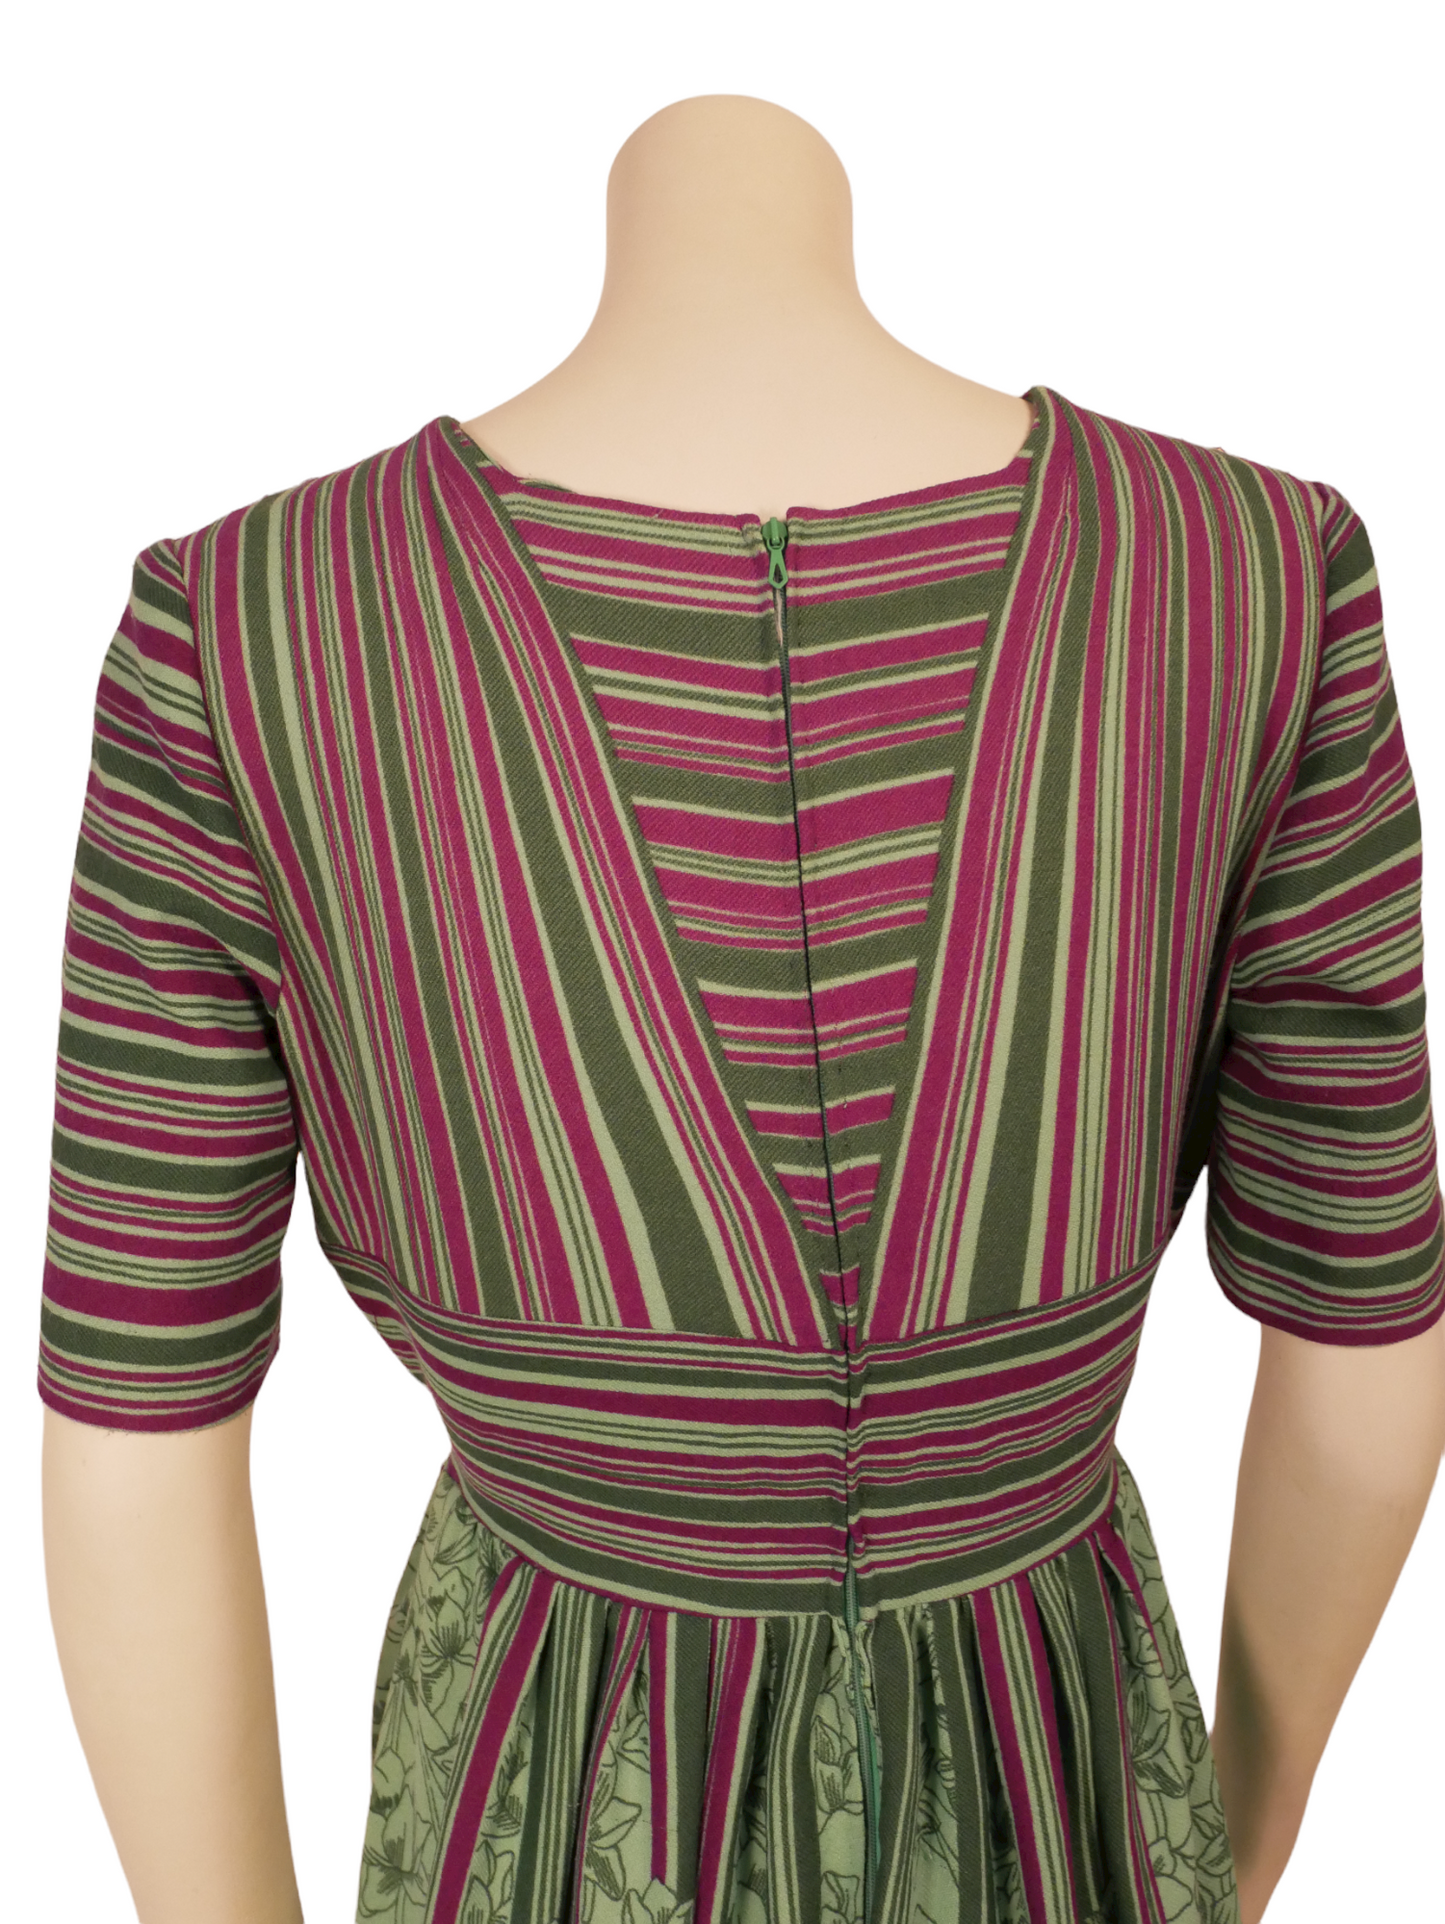 Lanvin vintage long dress with purple and green stripes - M - 1970s